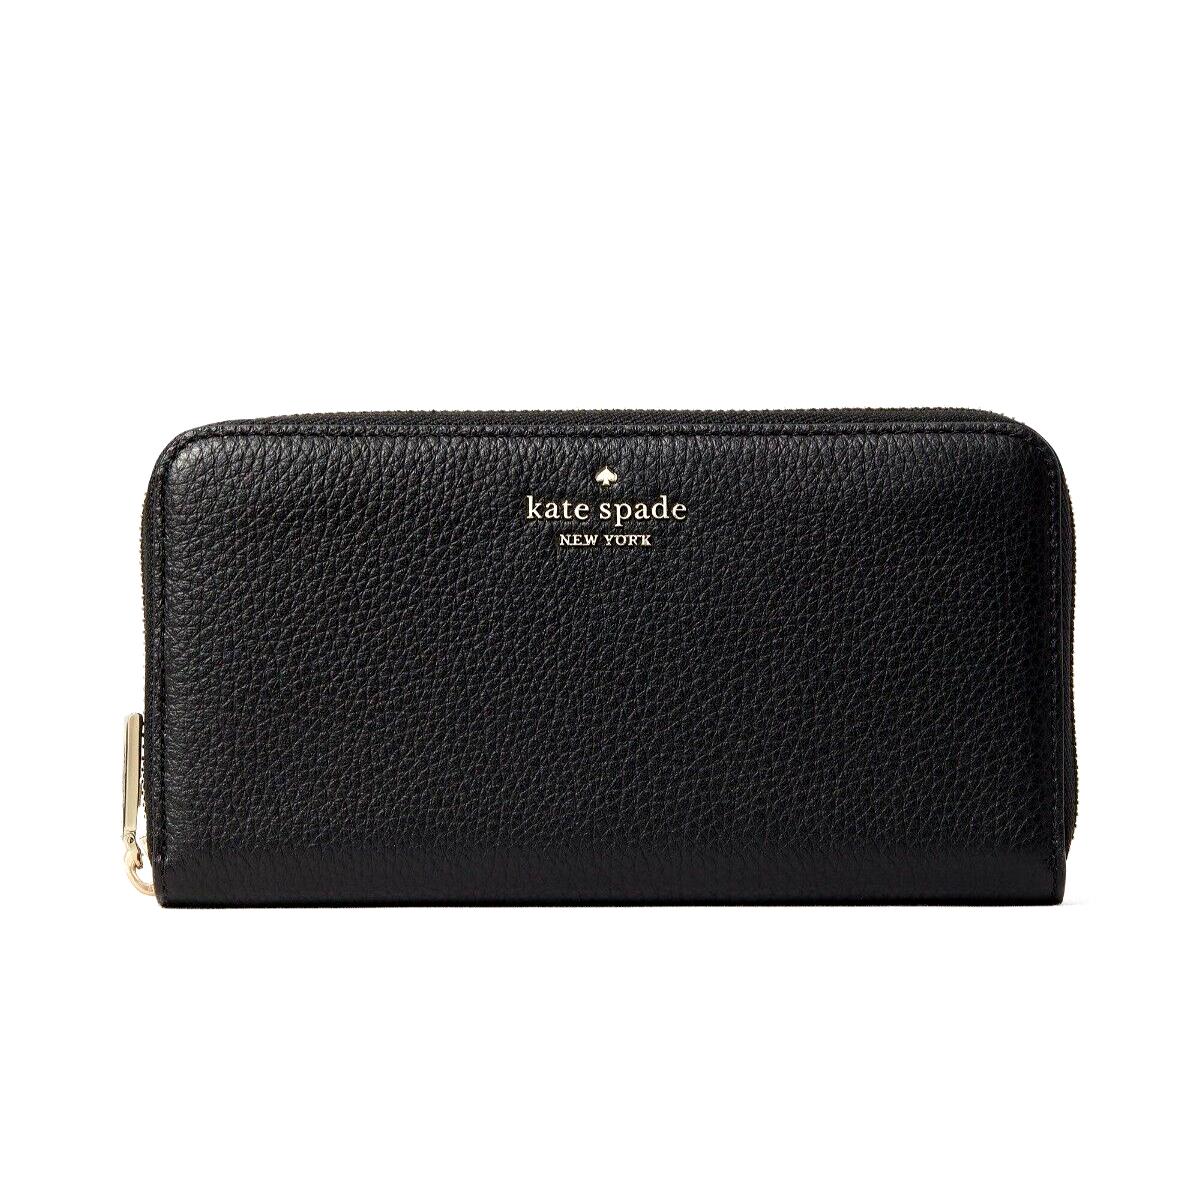 New Kate Spade Leila Large Continental Wallet Pebble Leather Black